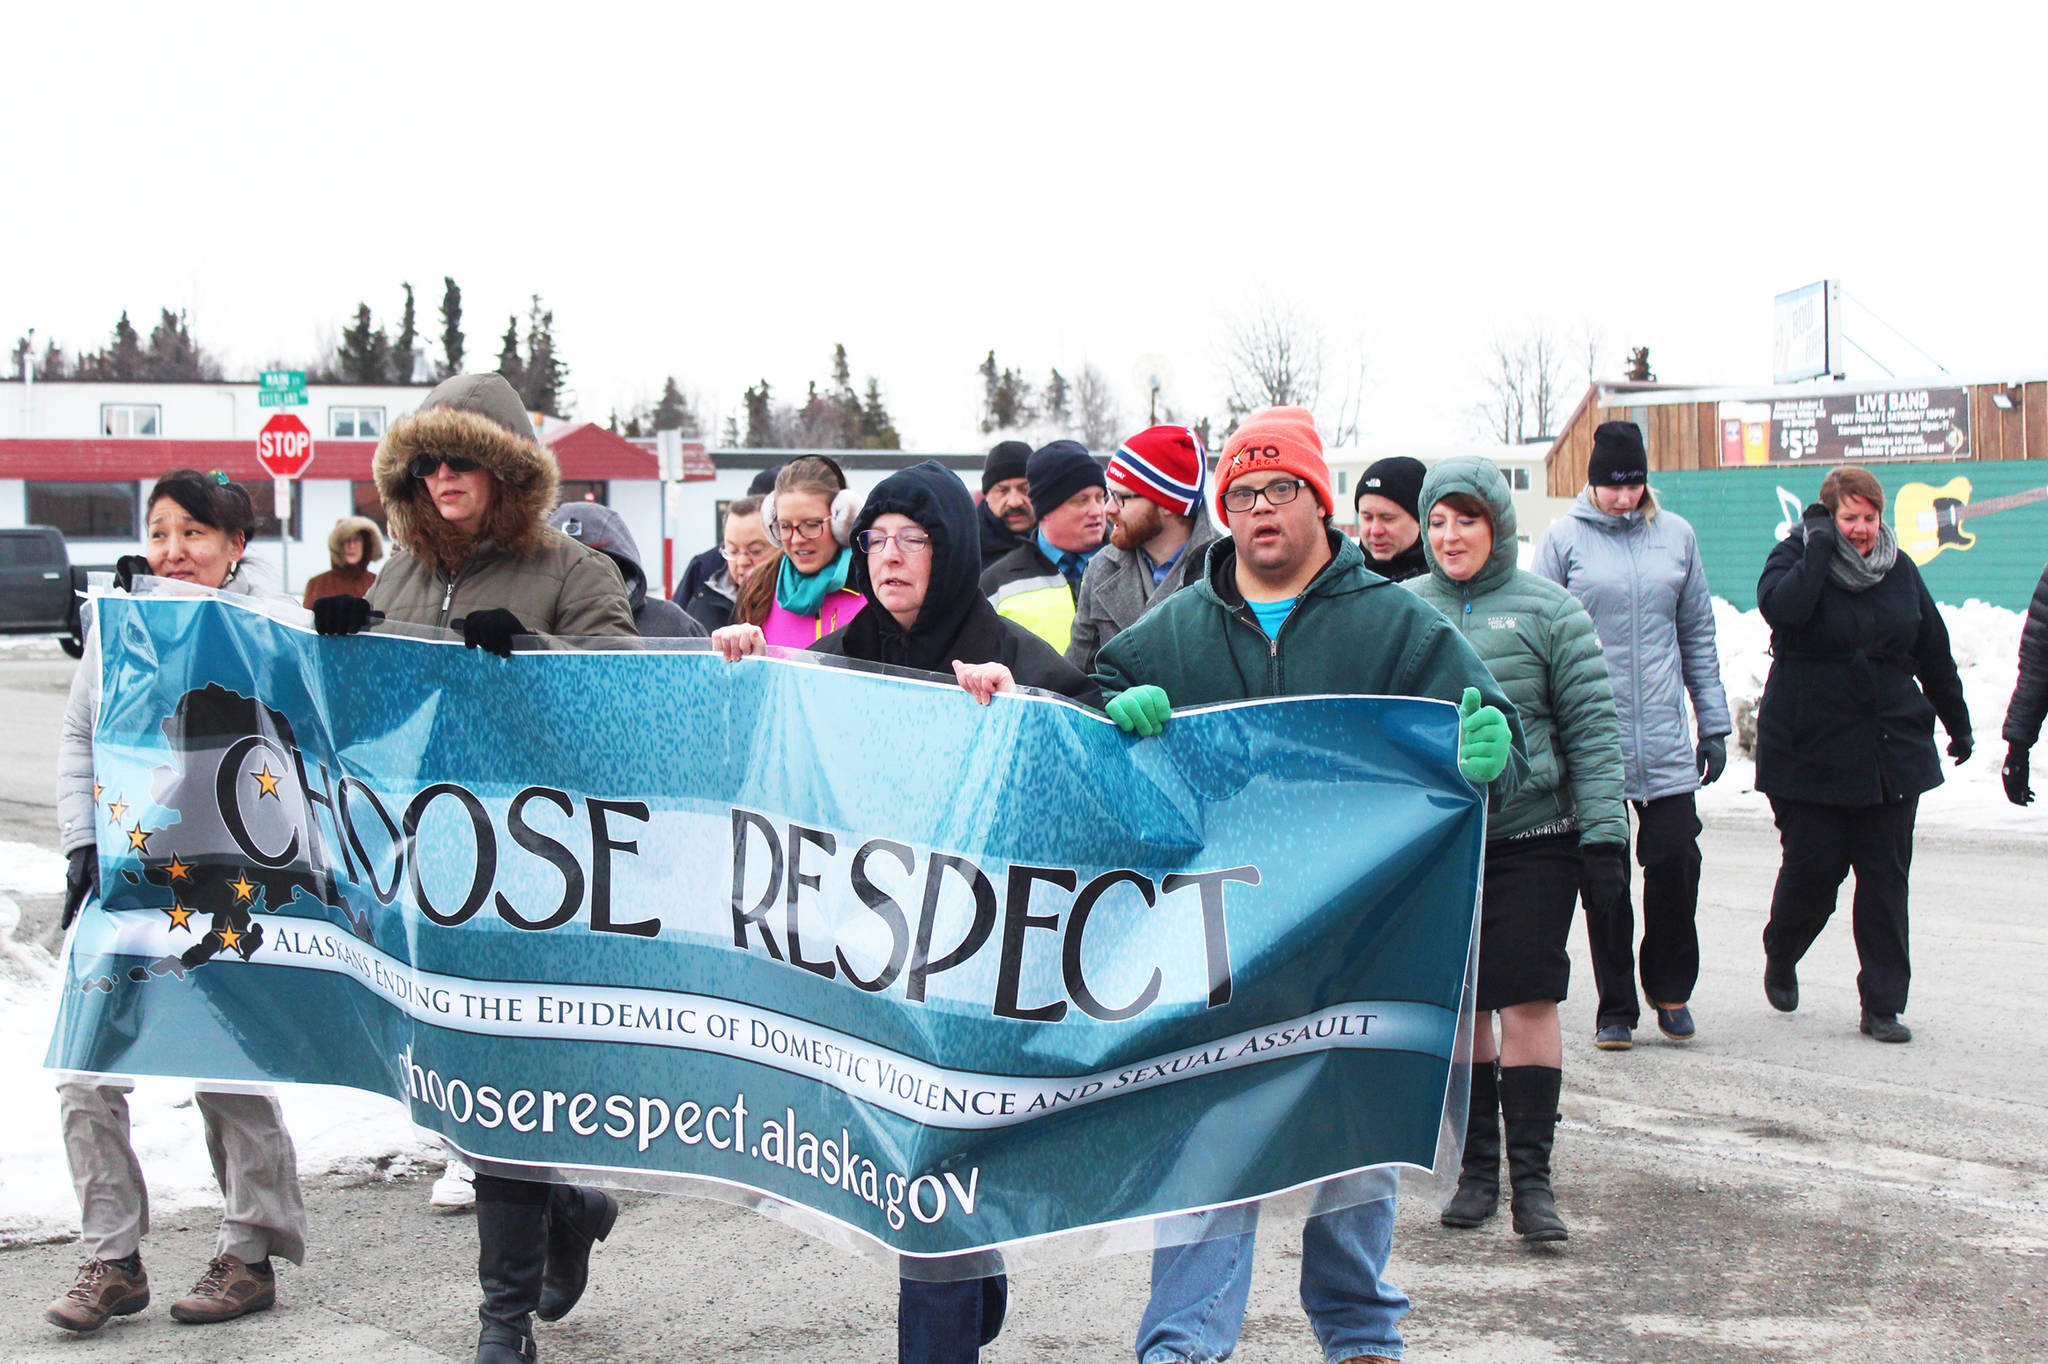 Residents march into the Kenai Chamber of Commerce and Visitor Center parking lot during the annual Choose Respect event Thursday, March 30, 2017 in Kenai, Alaska. Communities across the state march in solidarity with the initiative started in 2009 by former Gov. Sean Parnell. (Megan Pacer/Peninsula Clarion)